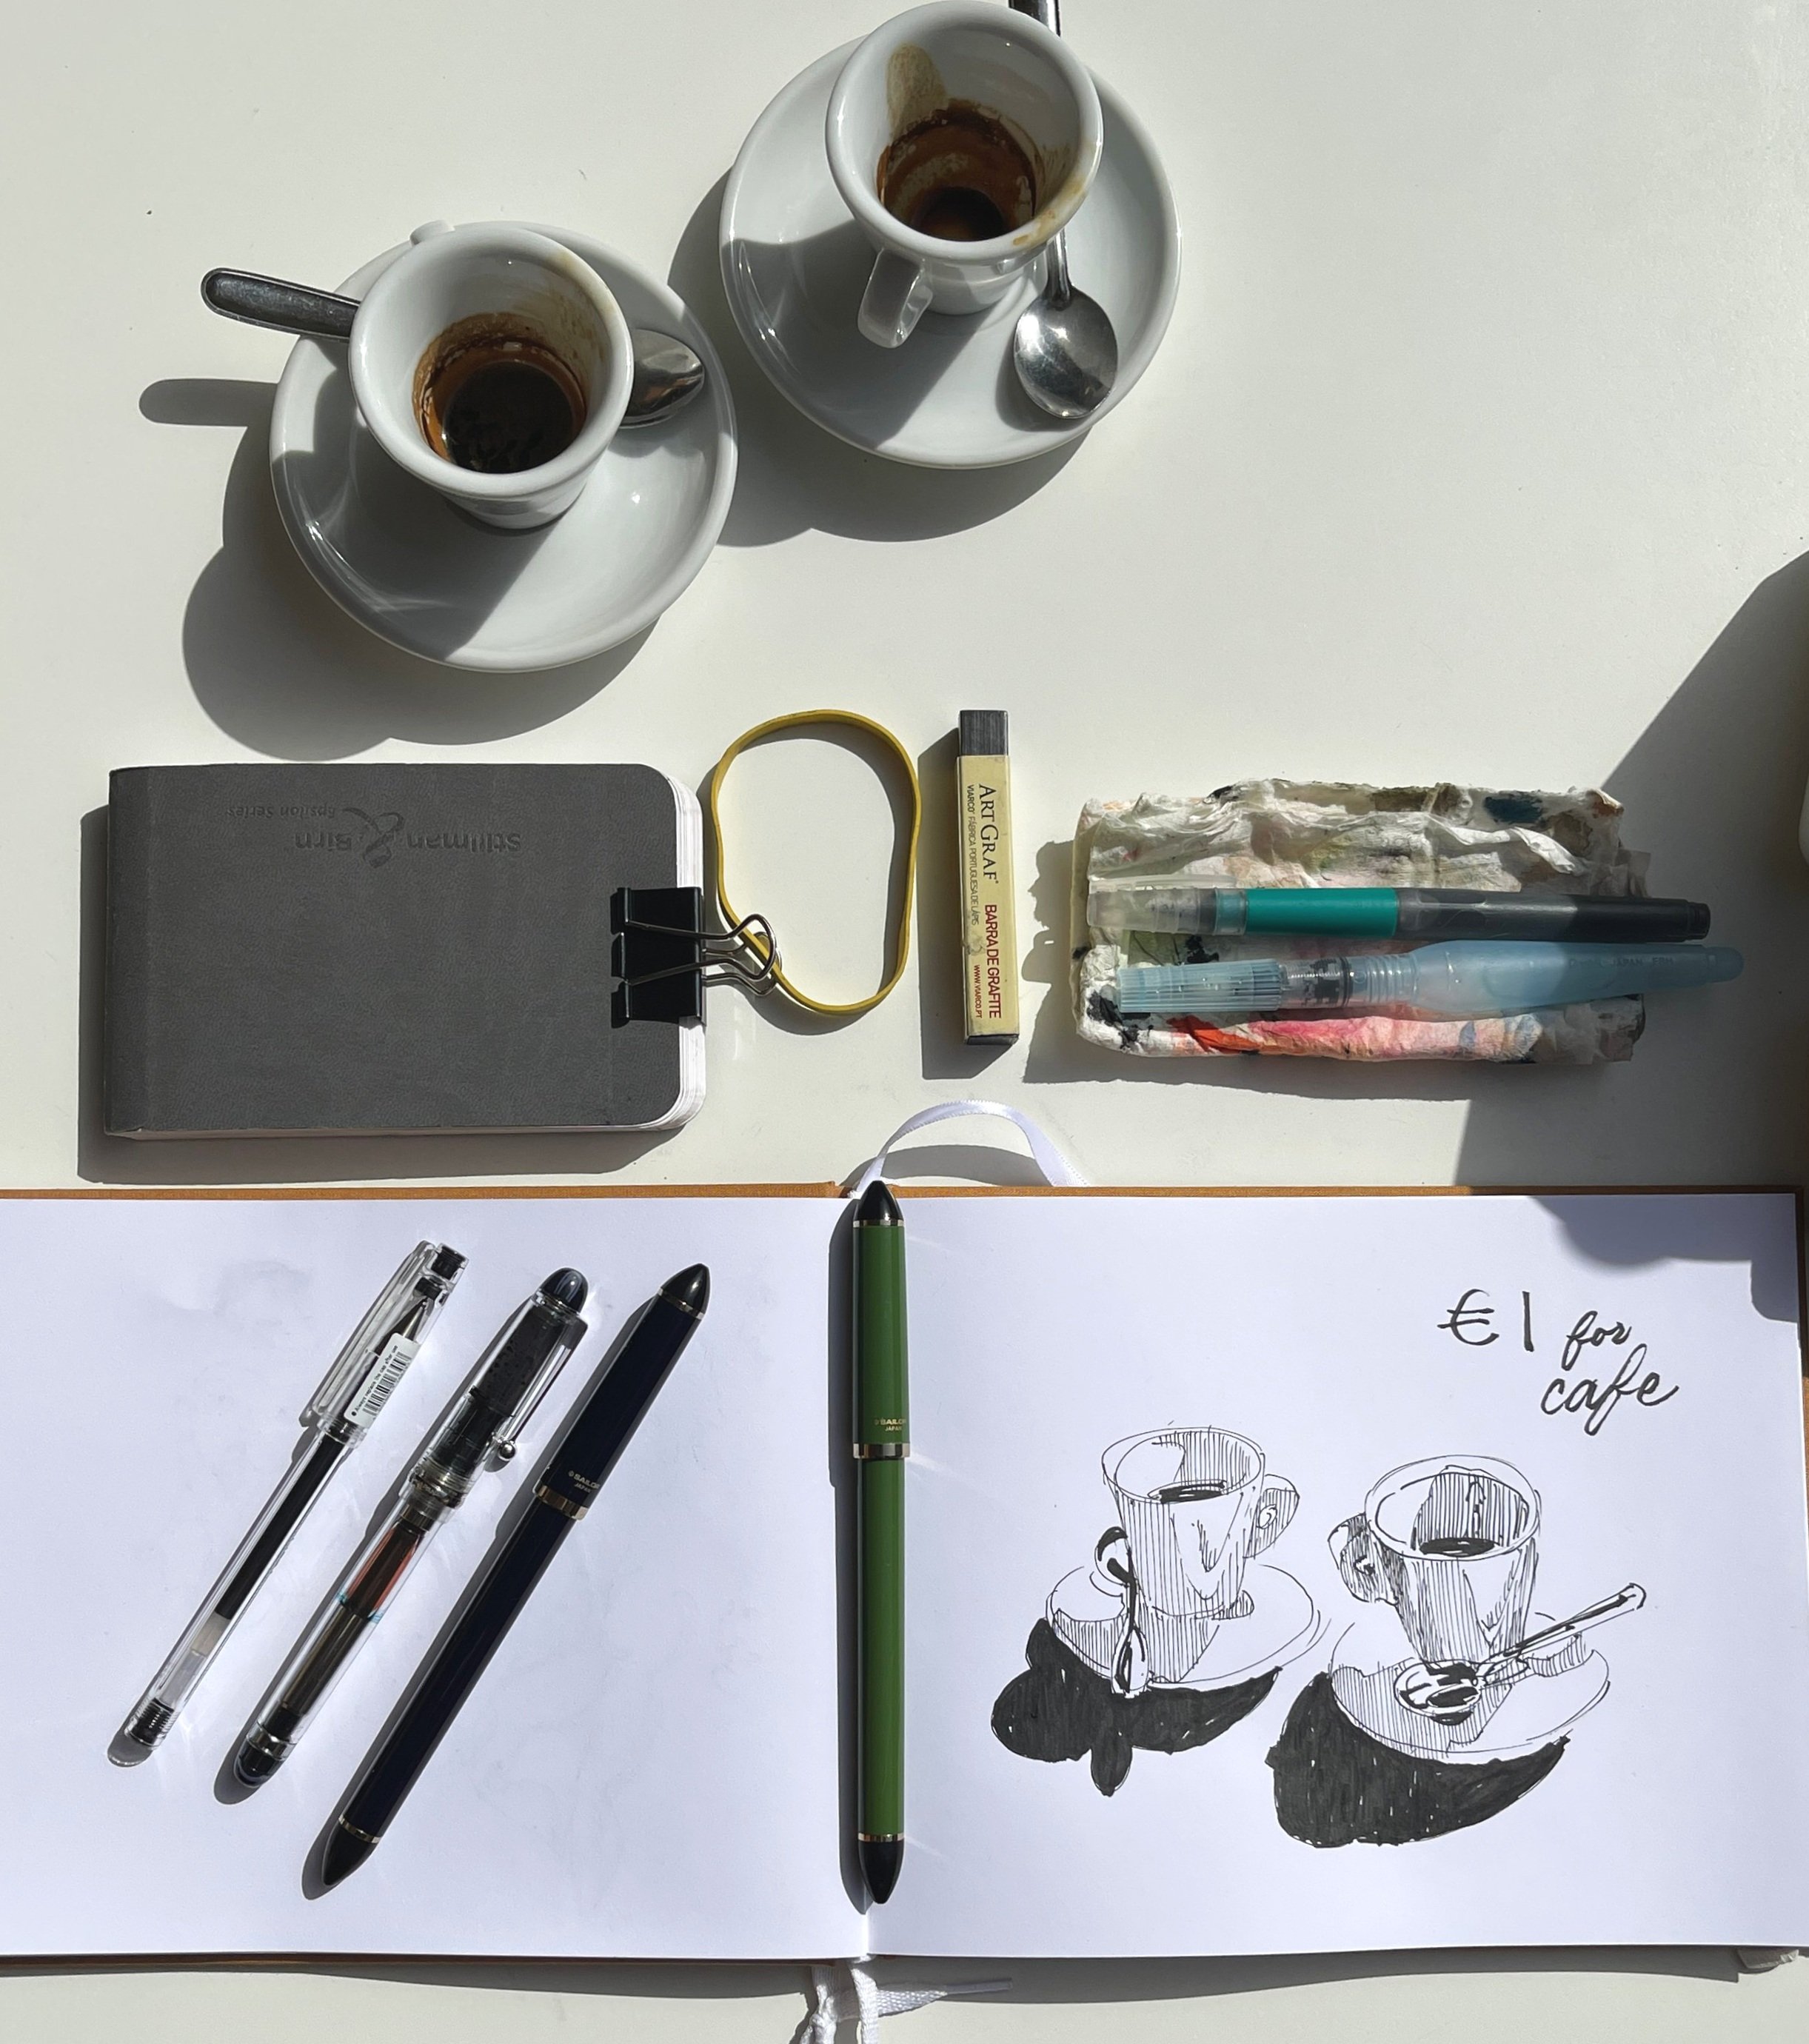 Top 5 Urban Sketching Tools (Expected & Not So Expected)